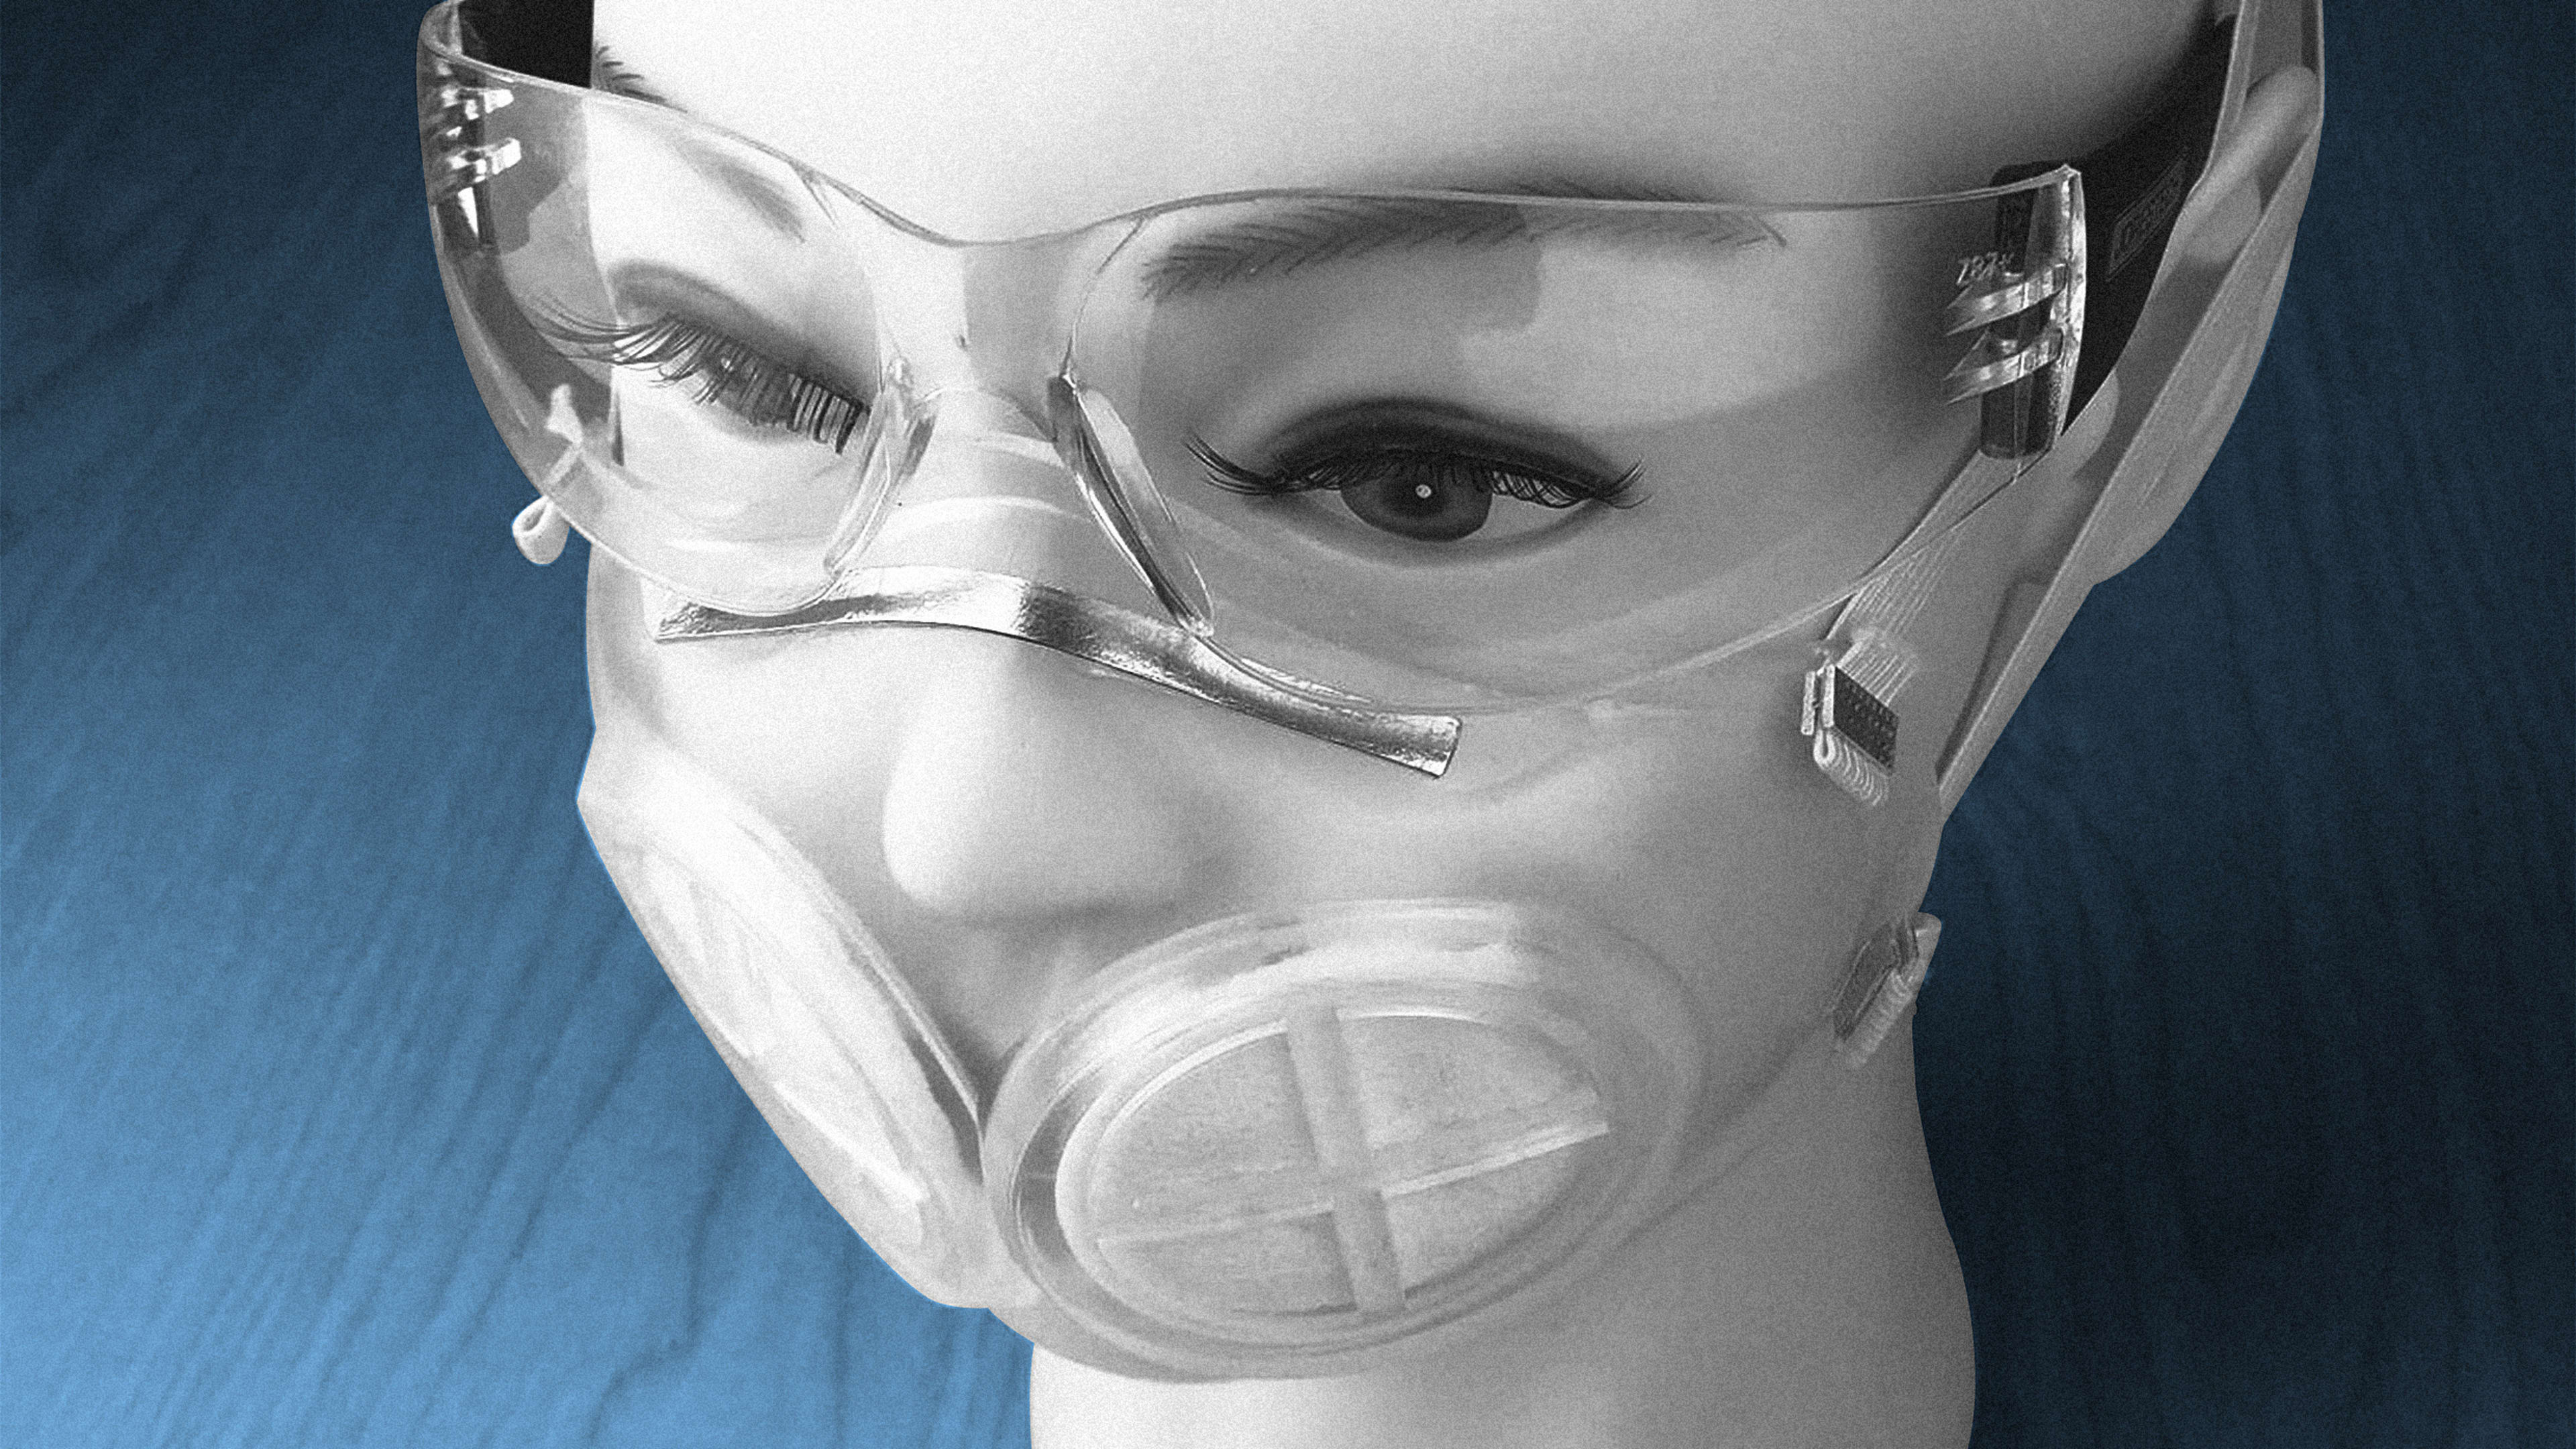 MIT researchers create a reusable silicone mask to replace the N95